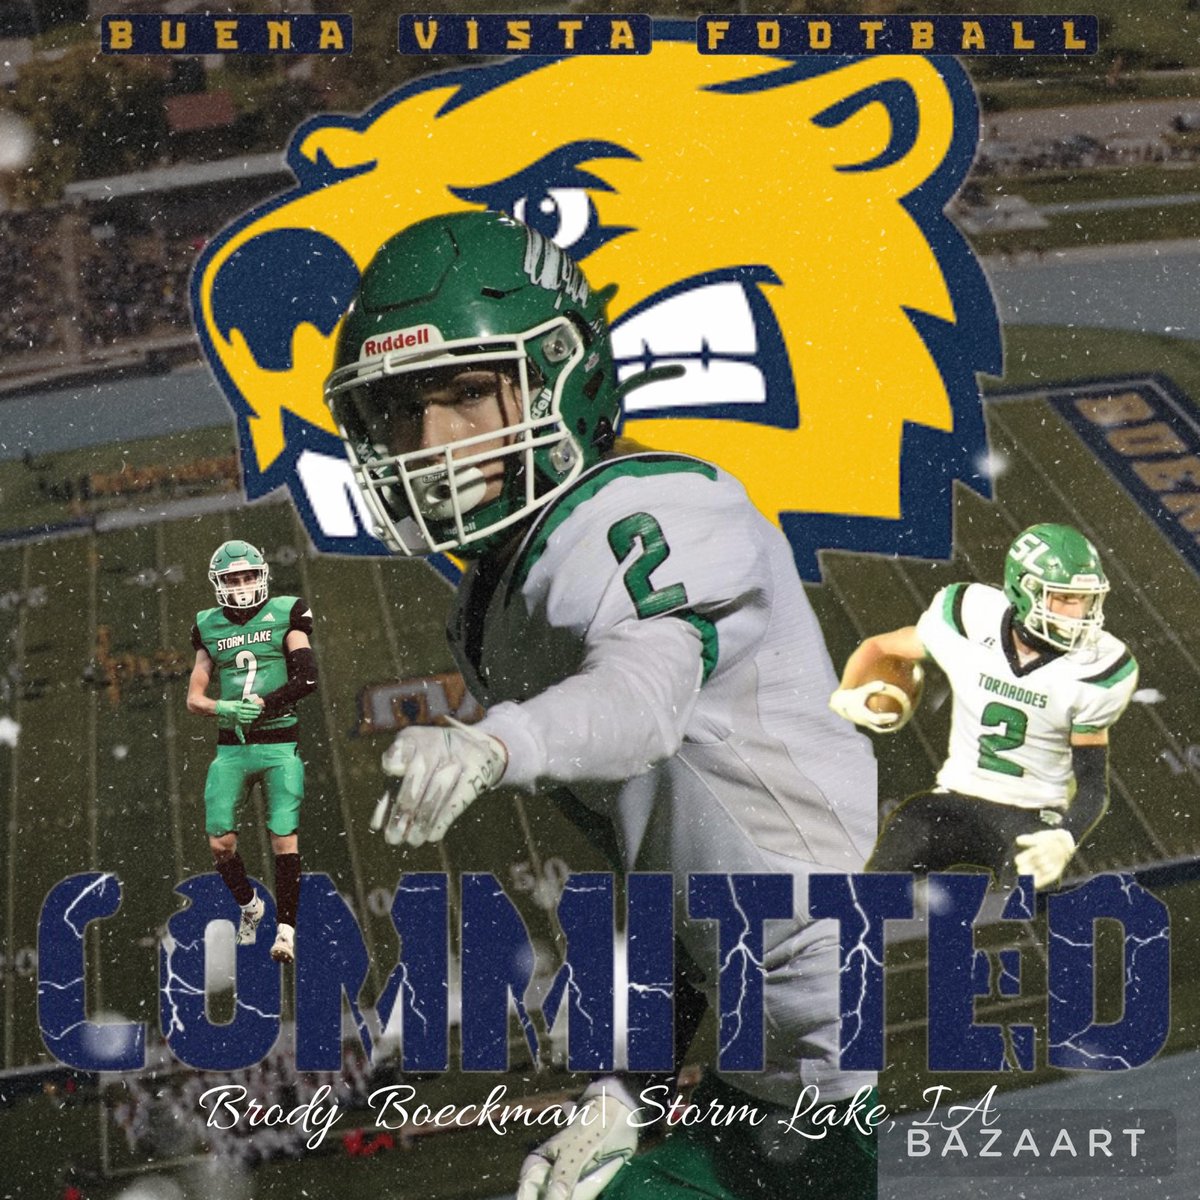 Woke up a Beaver!!🔵🟡🦫 #committed #rollbeavs